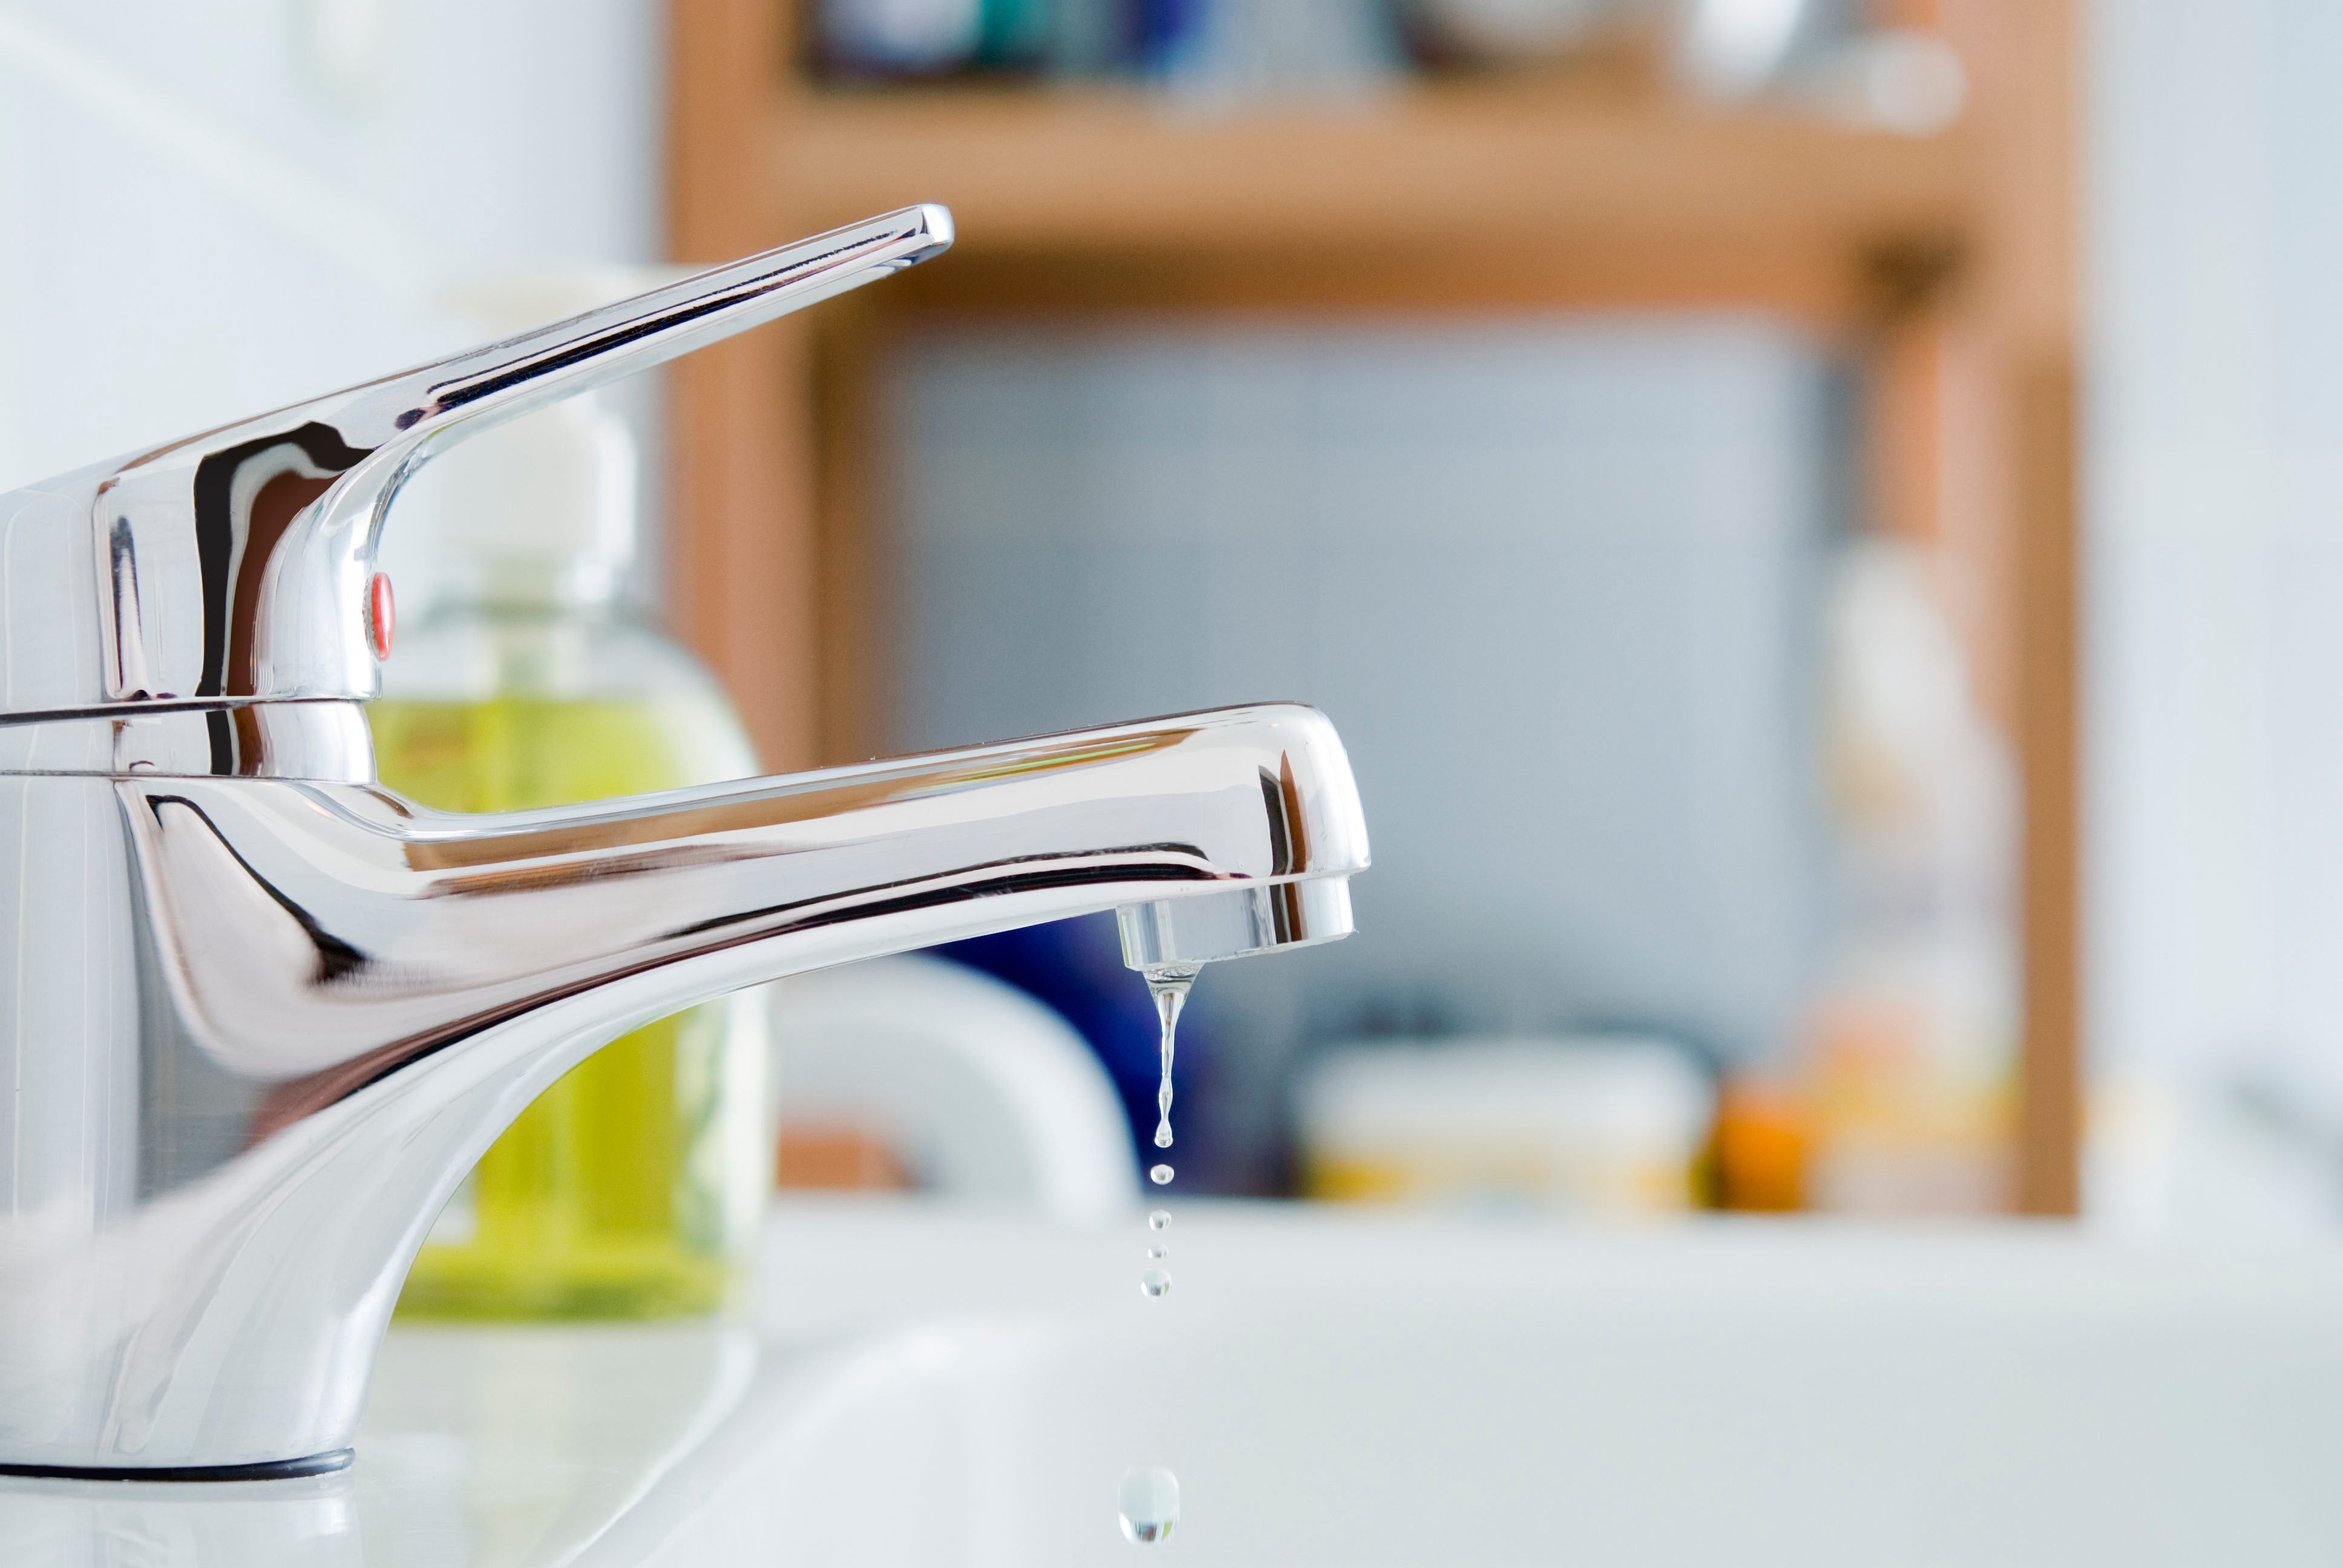 Here's How Much Water a Leaky Faucet Wastes Over Time - Reader's Digest